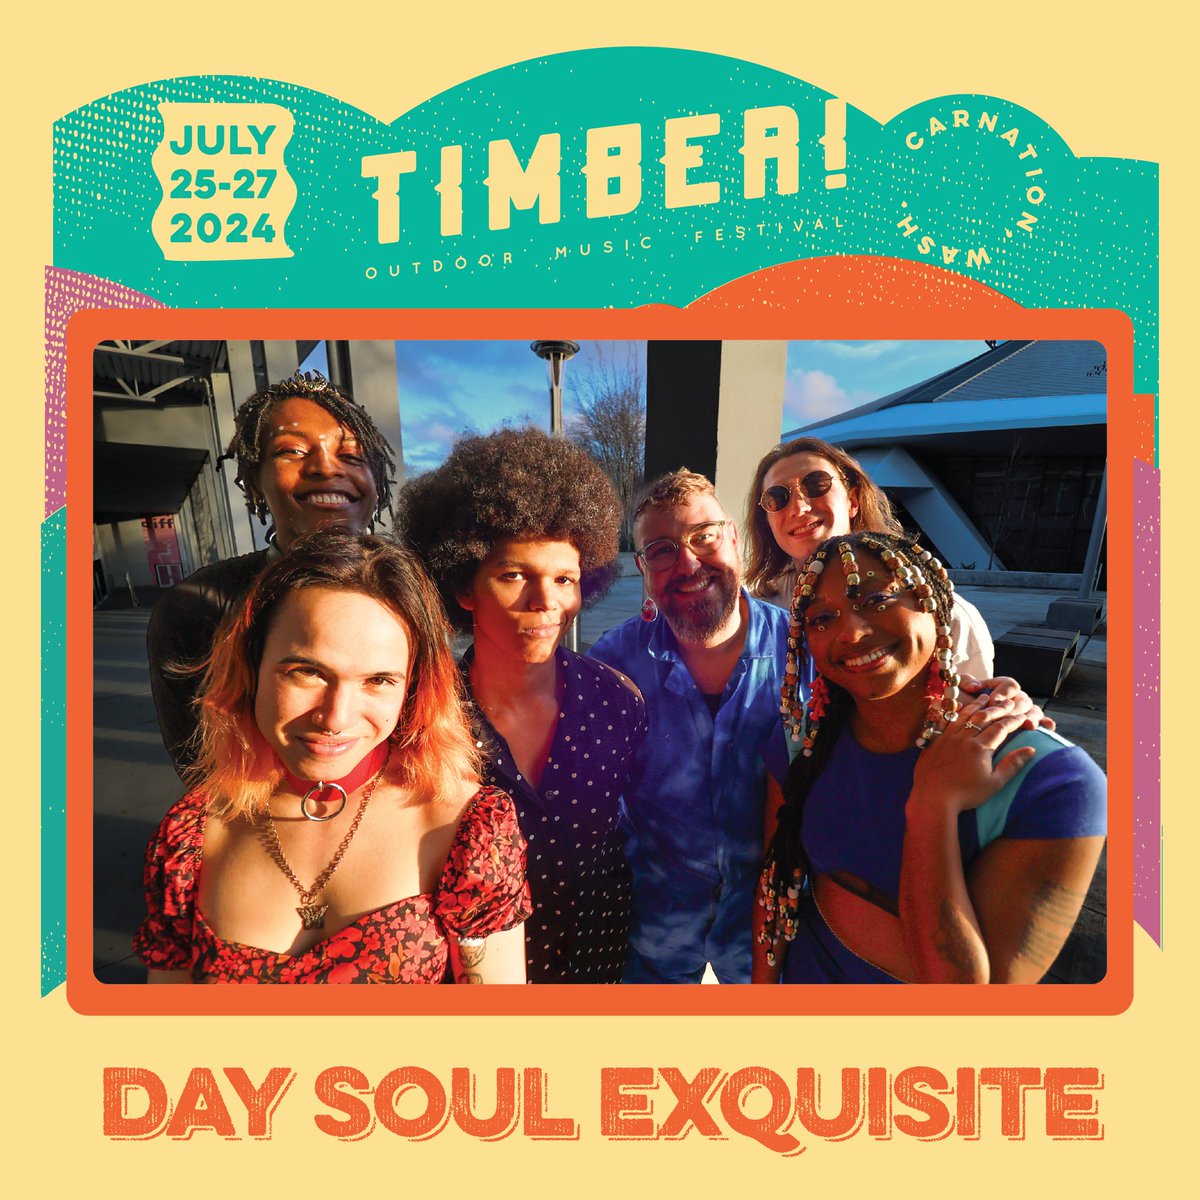 Seattle's psychedelic neo-soul sextet @dse_band returns to Timber! on Saturday, July 27. Their debut EP Sanguine & Cardamom is already one of our favorites of 2024. Snag your tickets & get ready to groove. Get your weekend passes before 6/1 to save $30: timbermusicfest.com